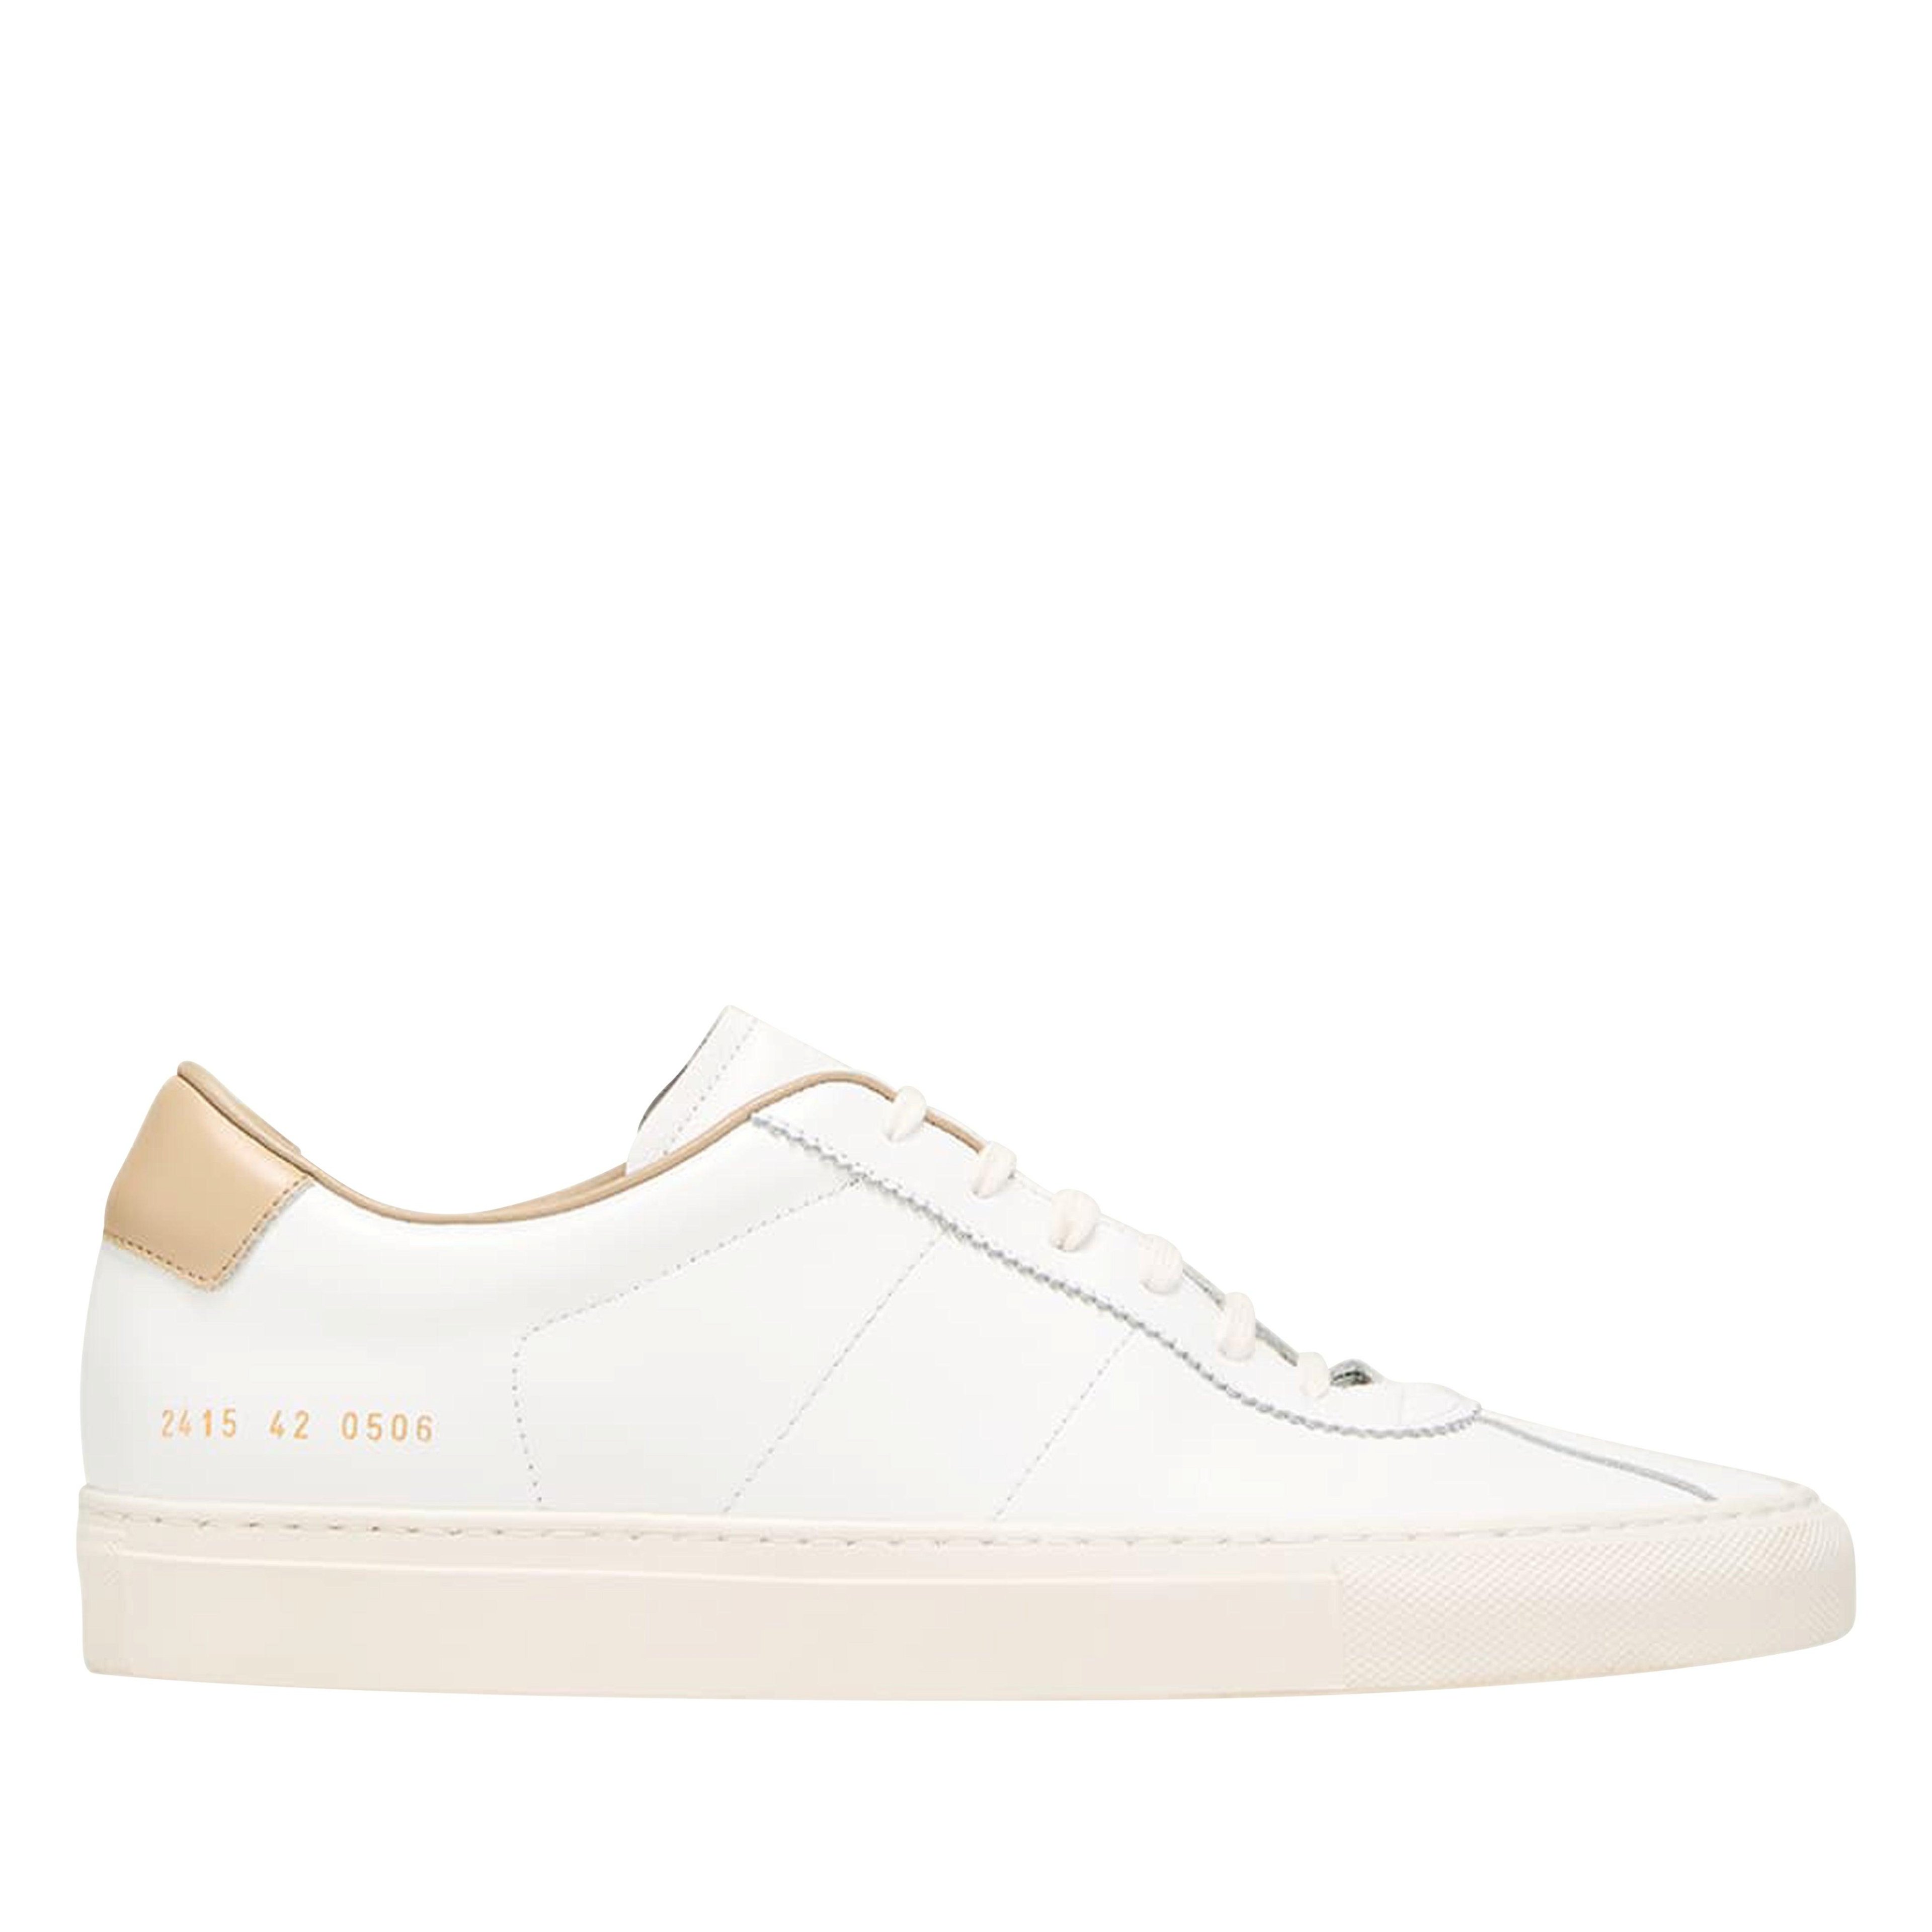 Common Projects - Tennis 70 Sneakers - (White) by COMMON PROJECTS